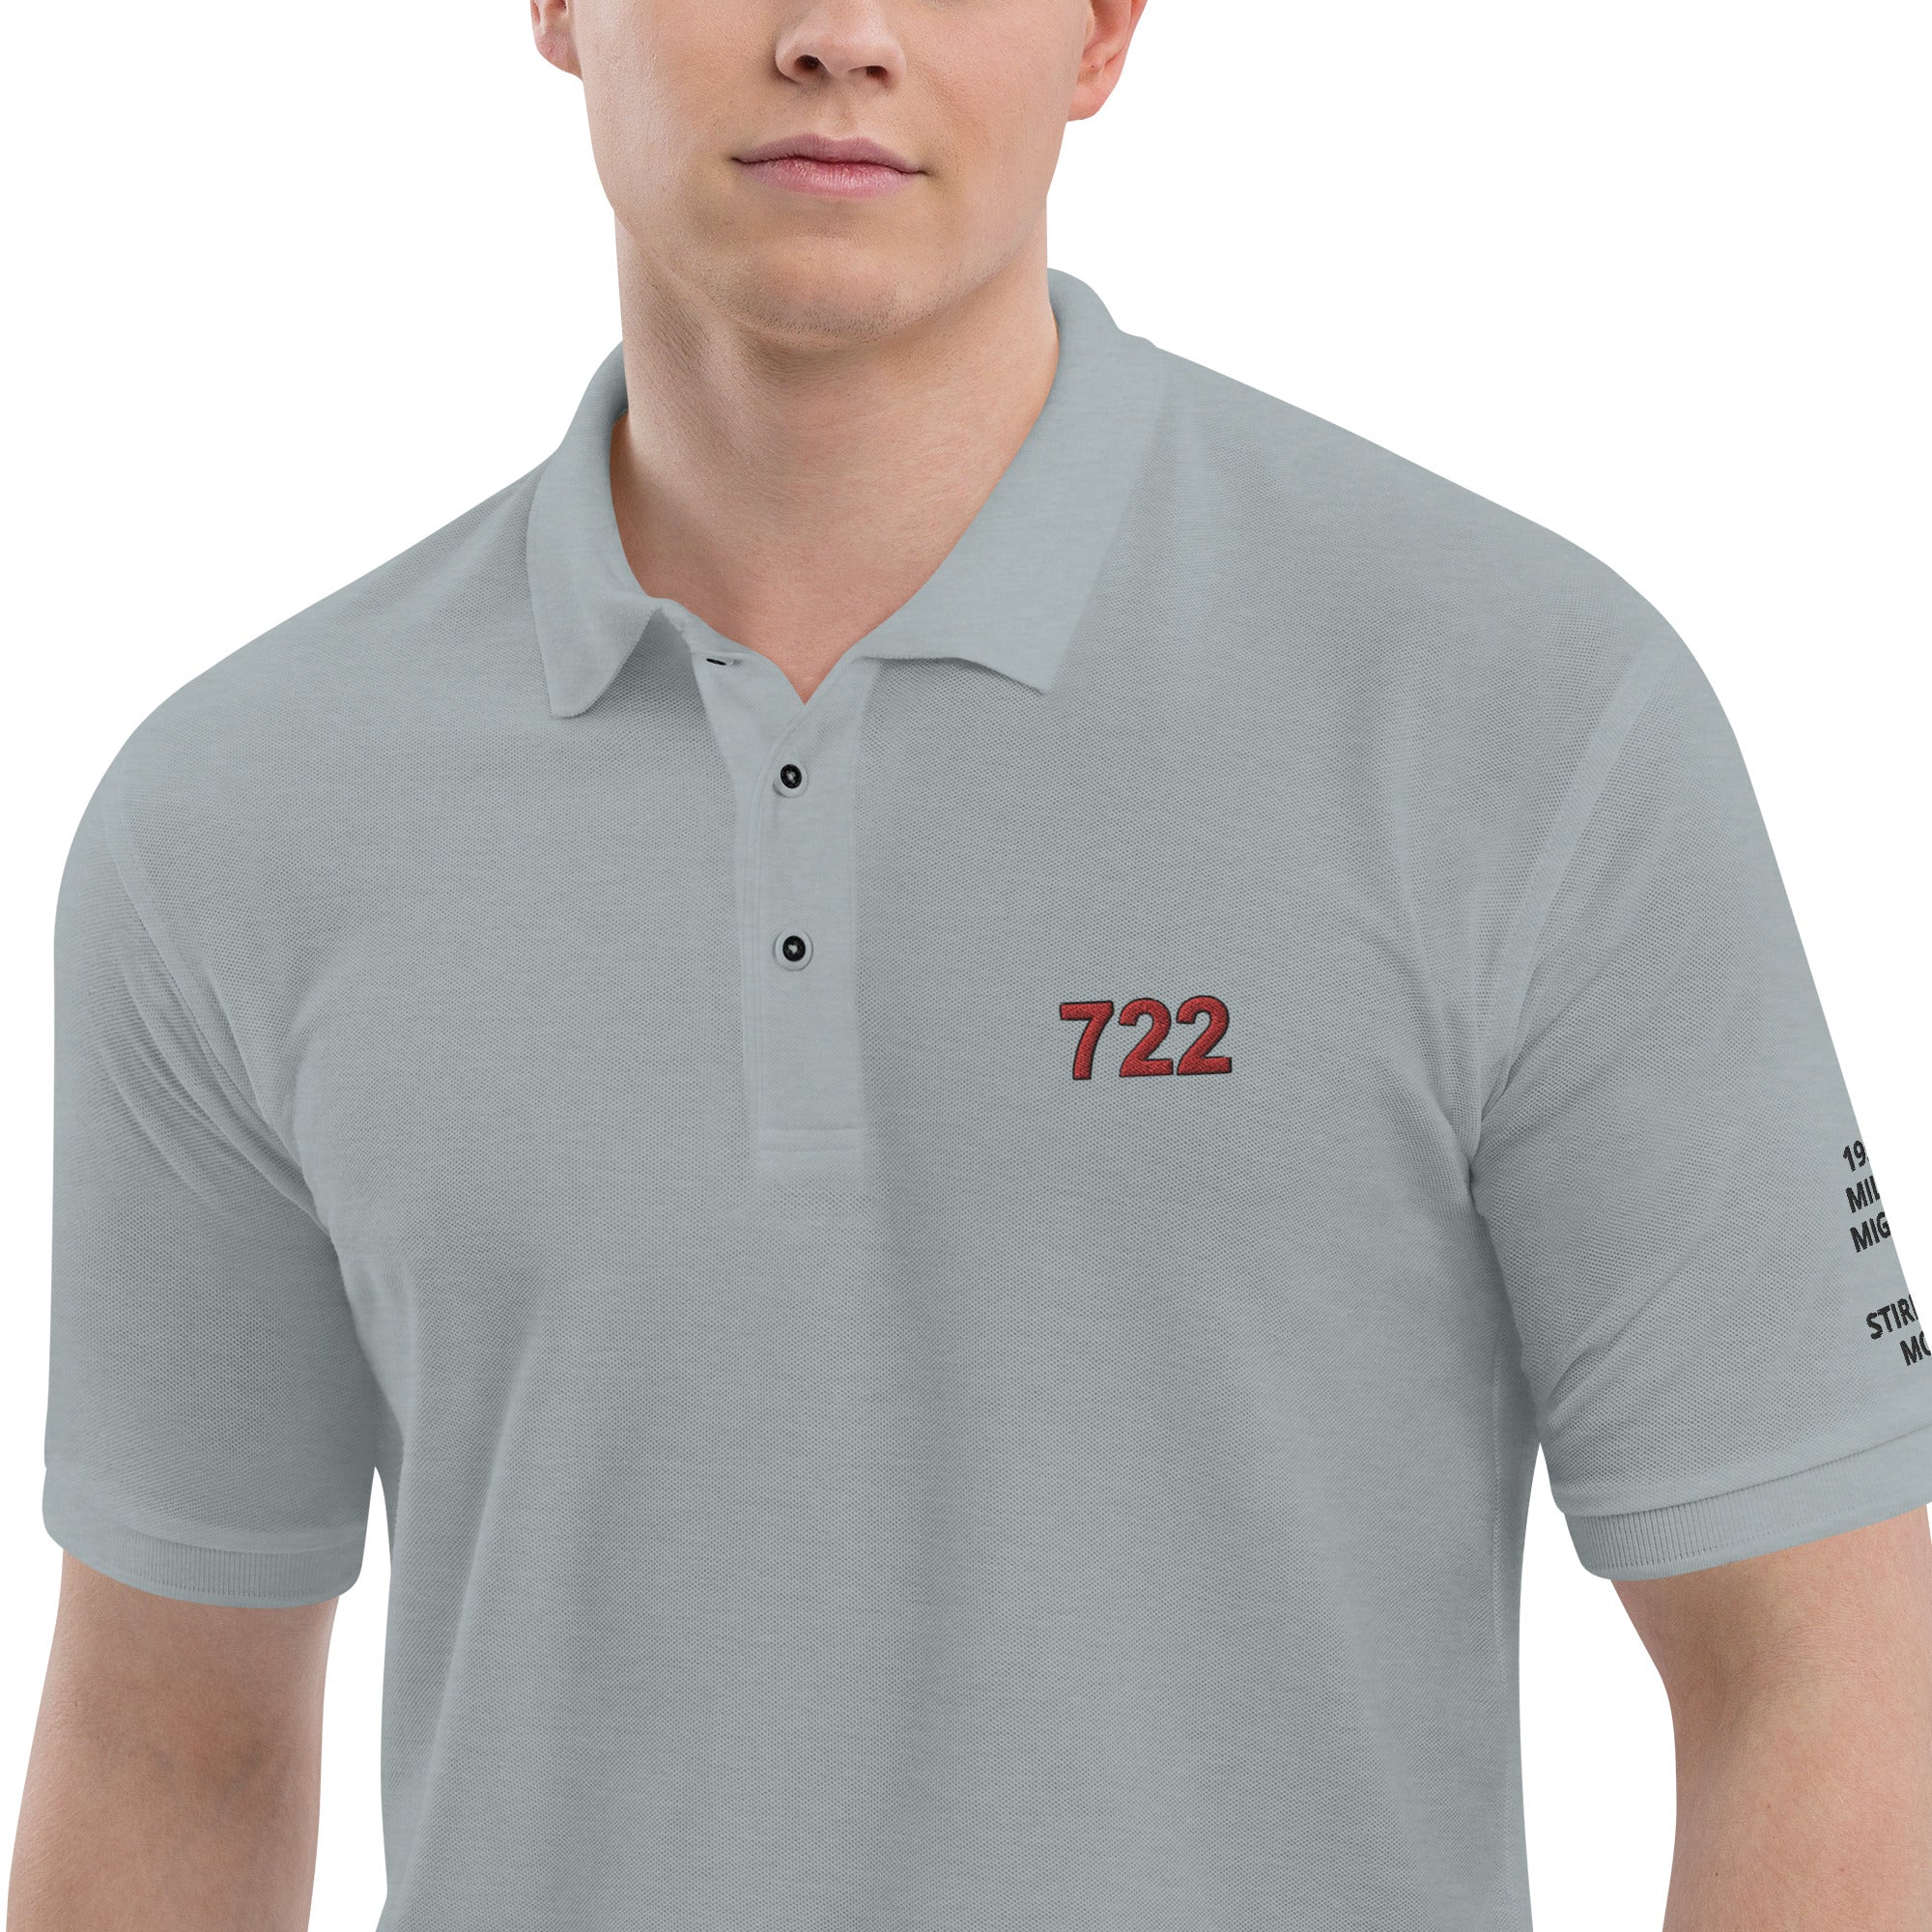 722: Stirling Moss at Mille Miglia 1955 Mercedes SLR light grey polo shirt front